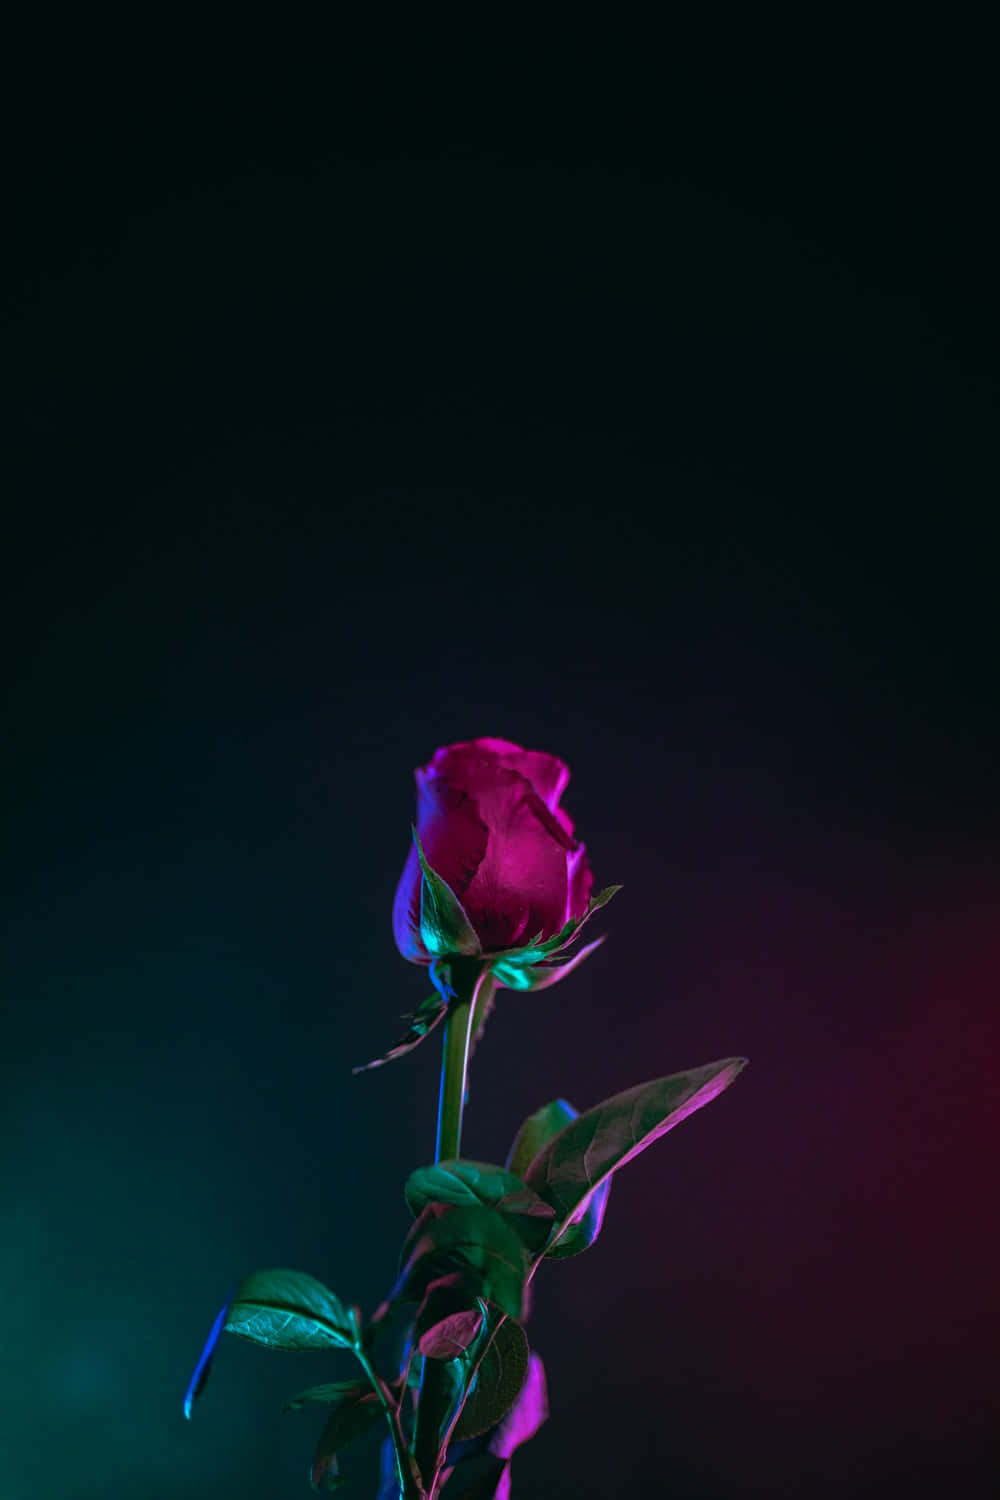 Enjoy the beauty and serenity that the vibrant colors of this cool Rose bring Wallpaper